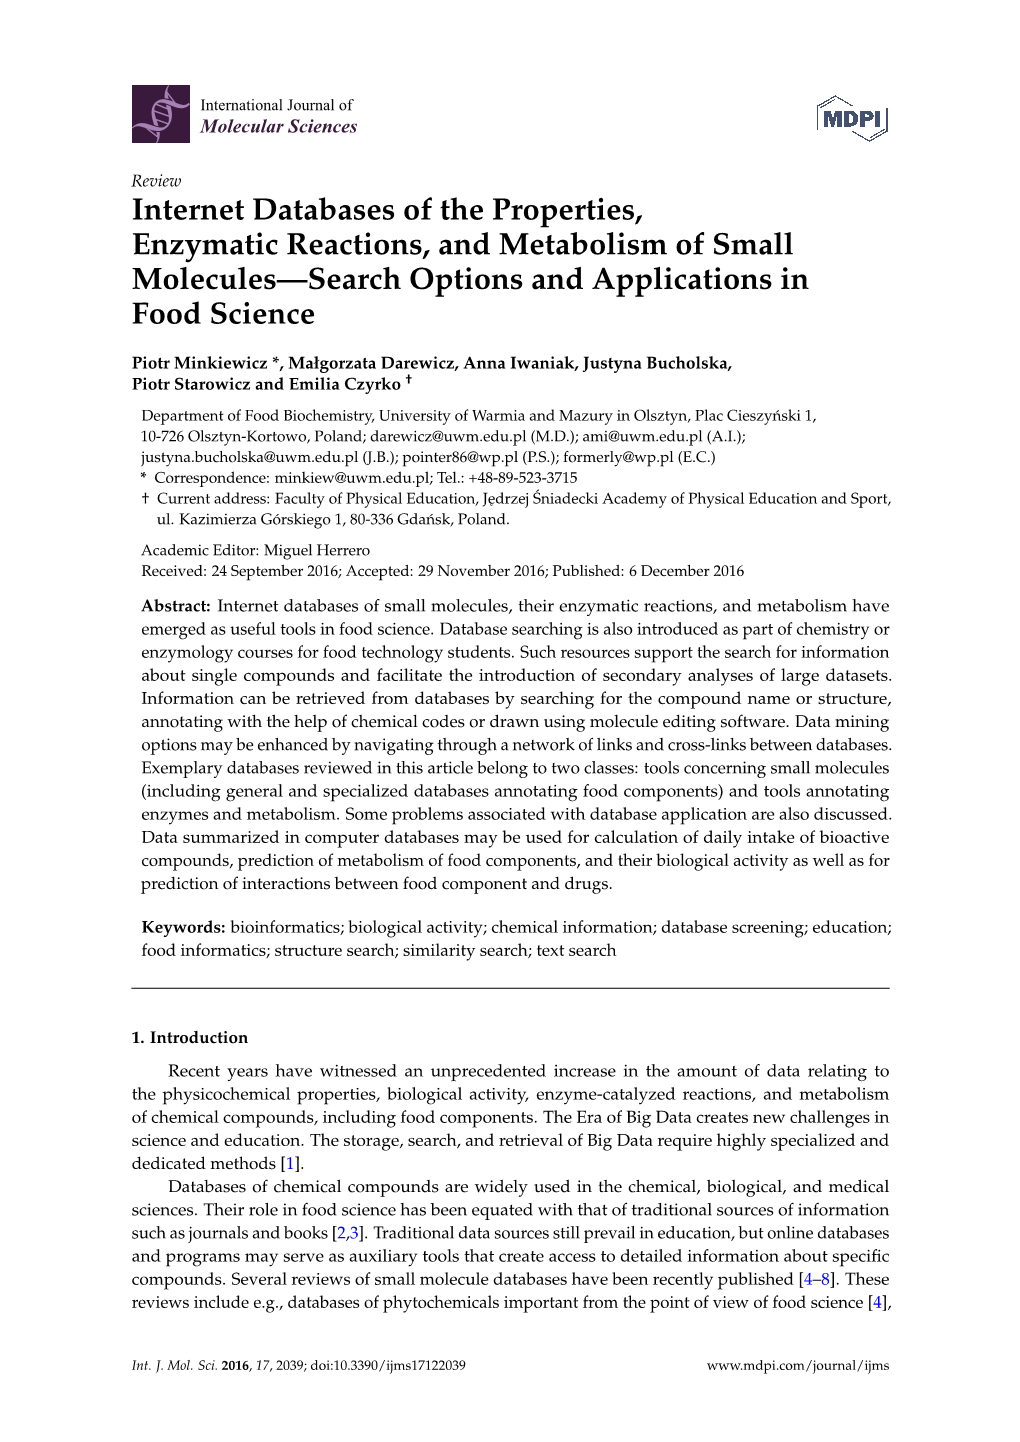 Internet Databases of the Properties, Enzymatic Reactions, and Metabolism of Small Molecules—Search Options and Applications in Food Science